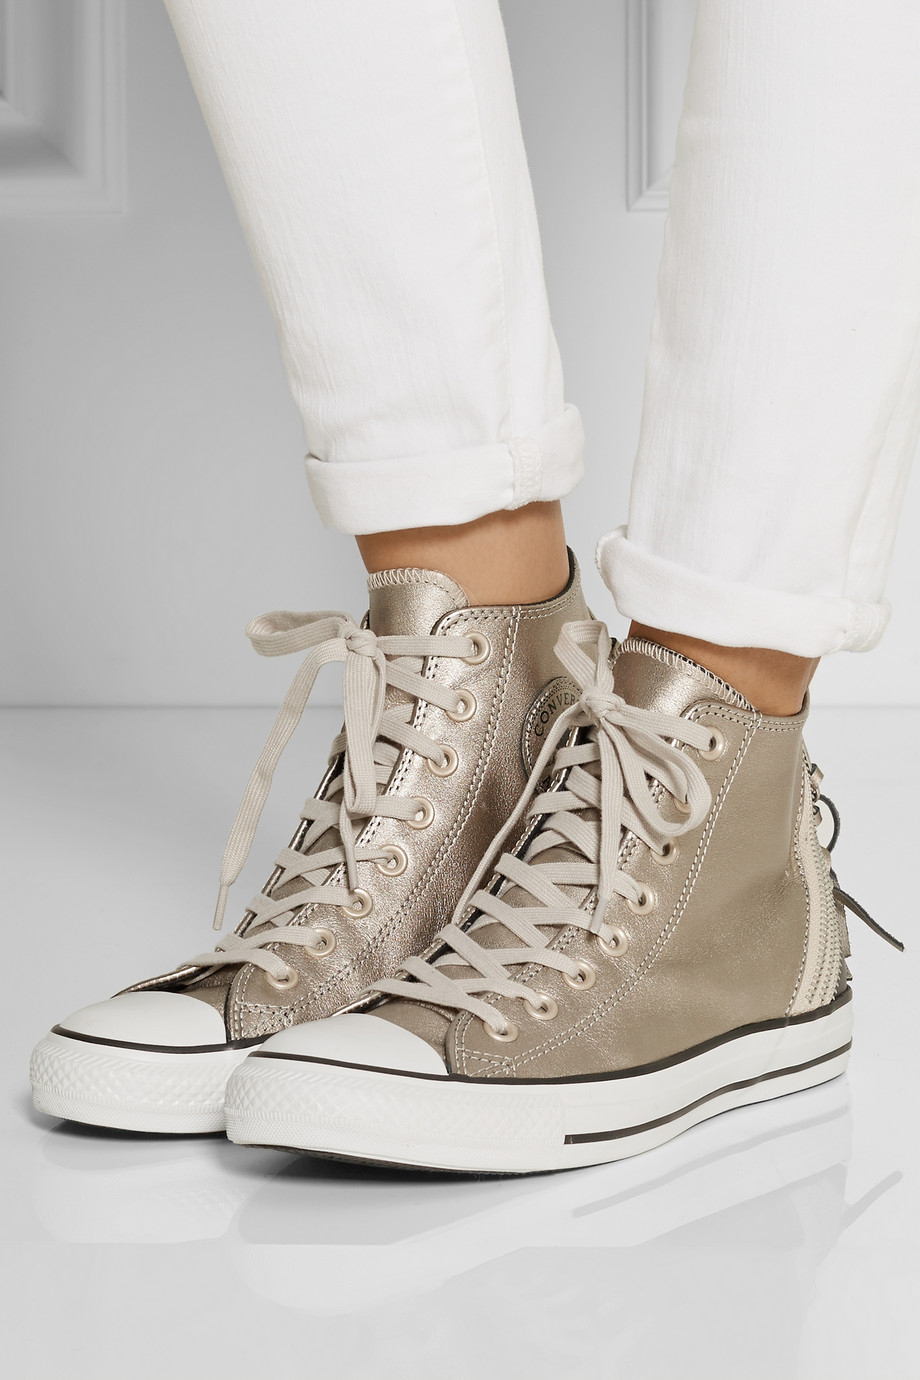 Converse Chuck Taylor All Star Tri Zip Leather High-Top Sneakers ... كمك